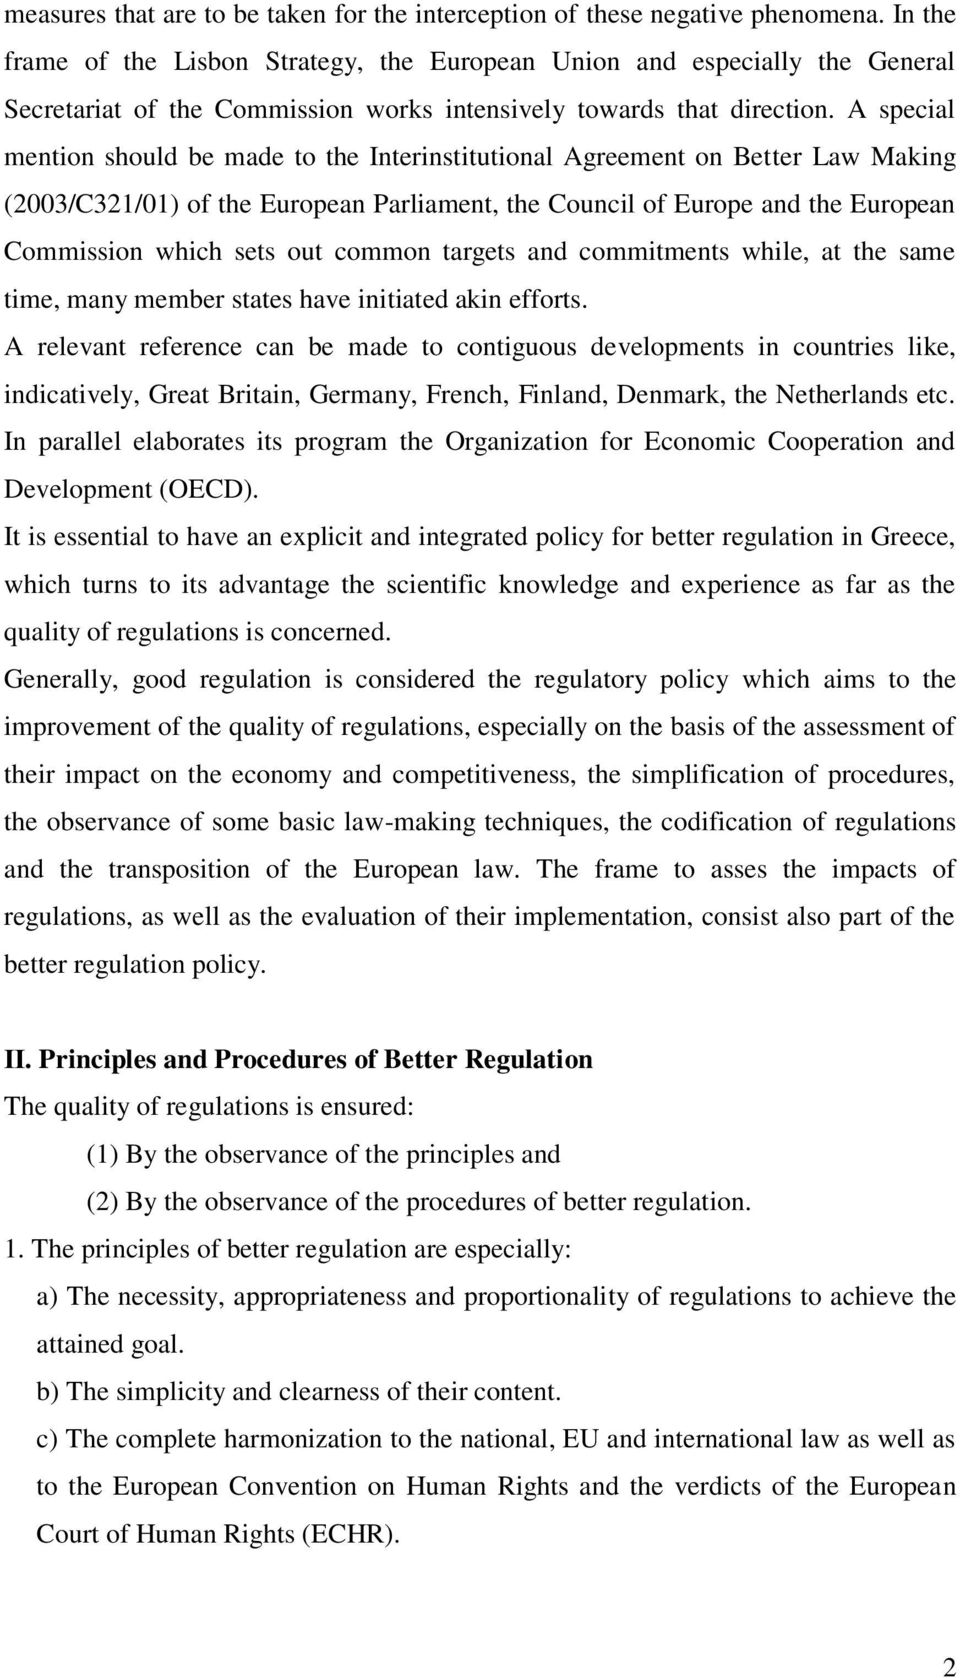 A special mention should be made to the Interinstitutional Agreement on Better Law Making (2003/C321/01) of the European Parliament, the Council of Europe and the European Commission which sets out